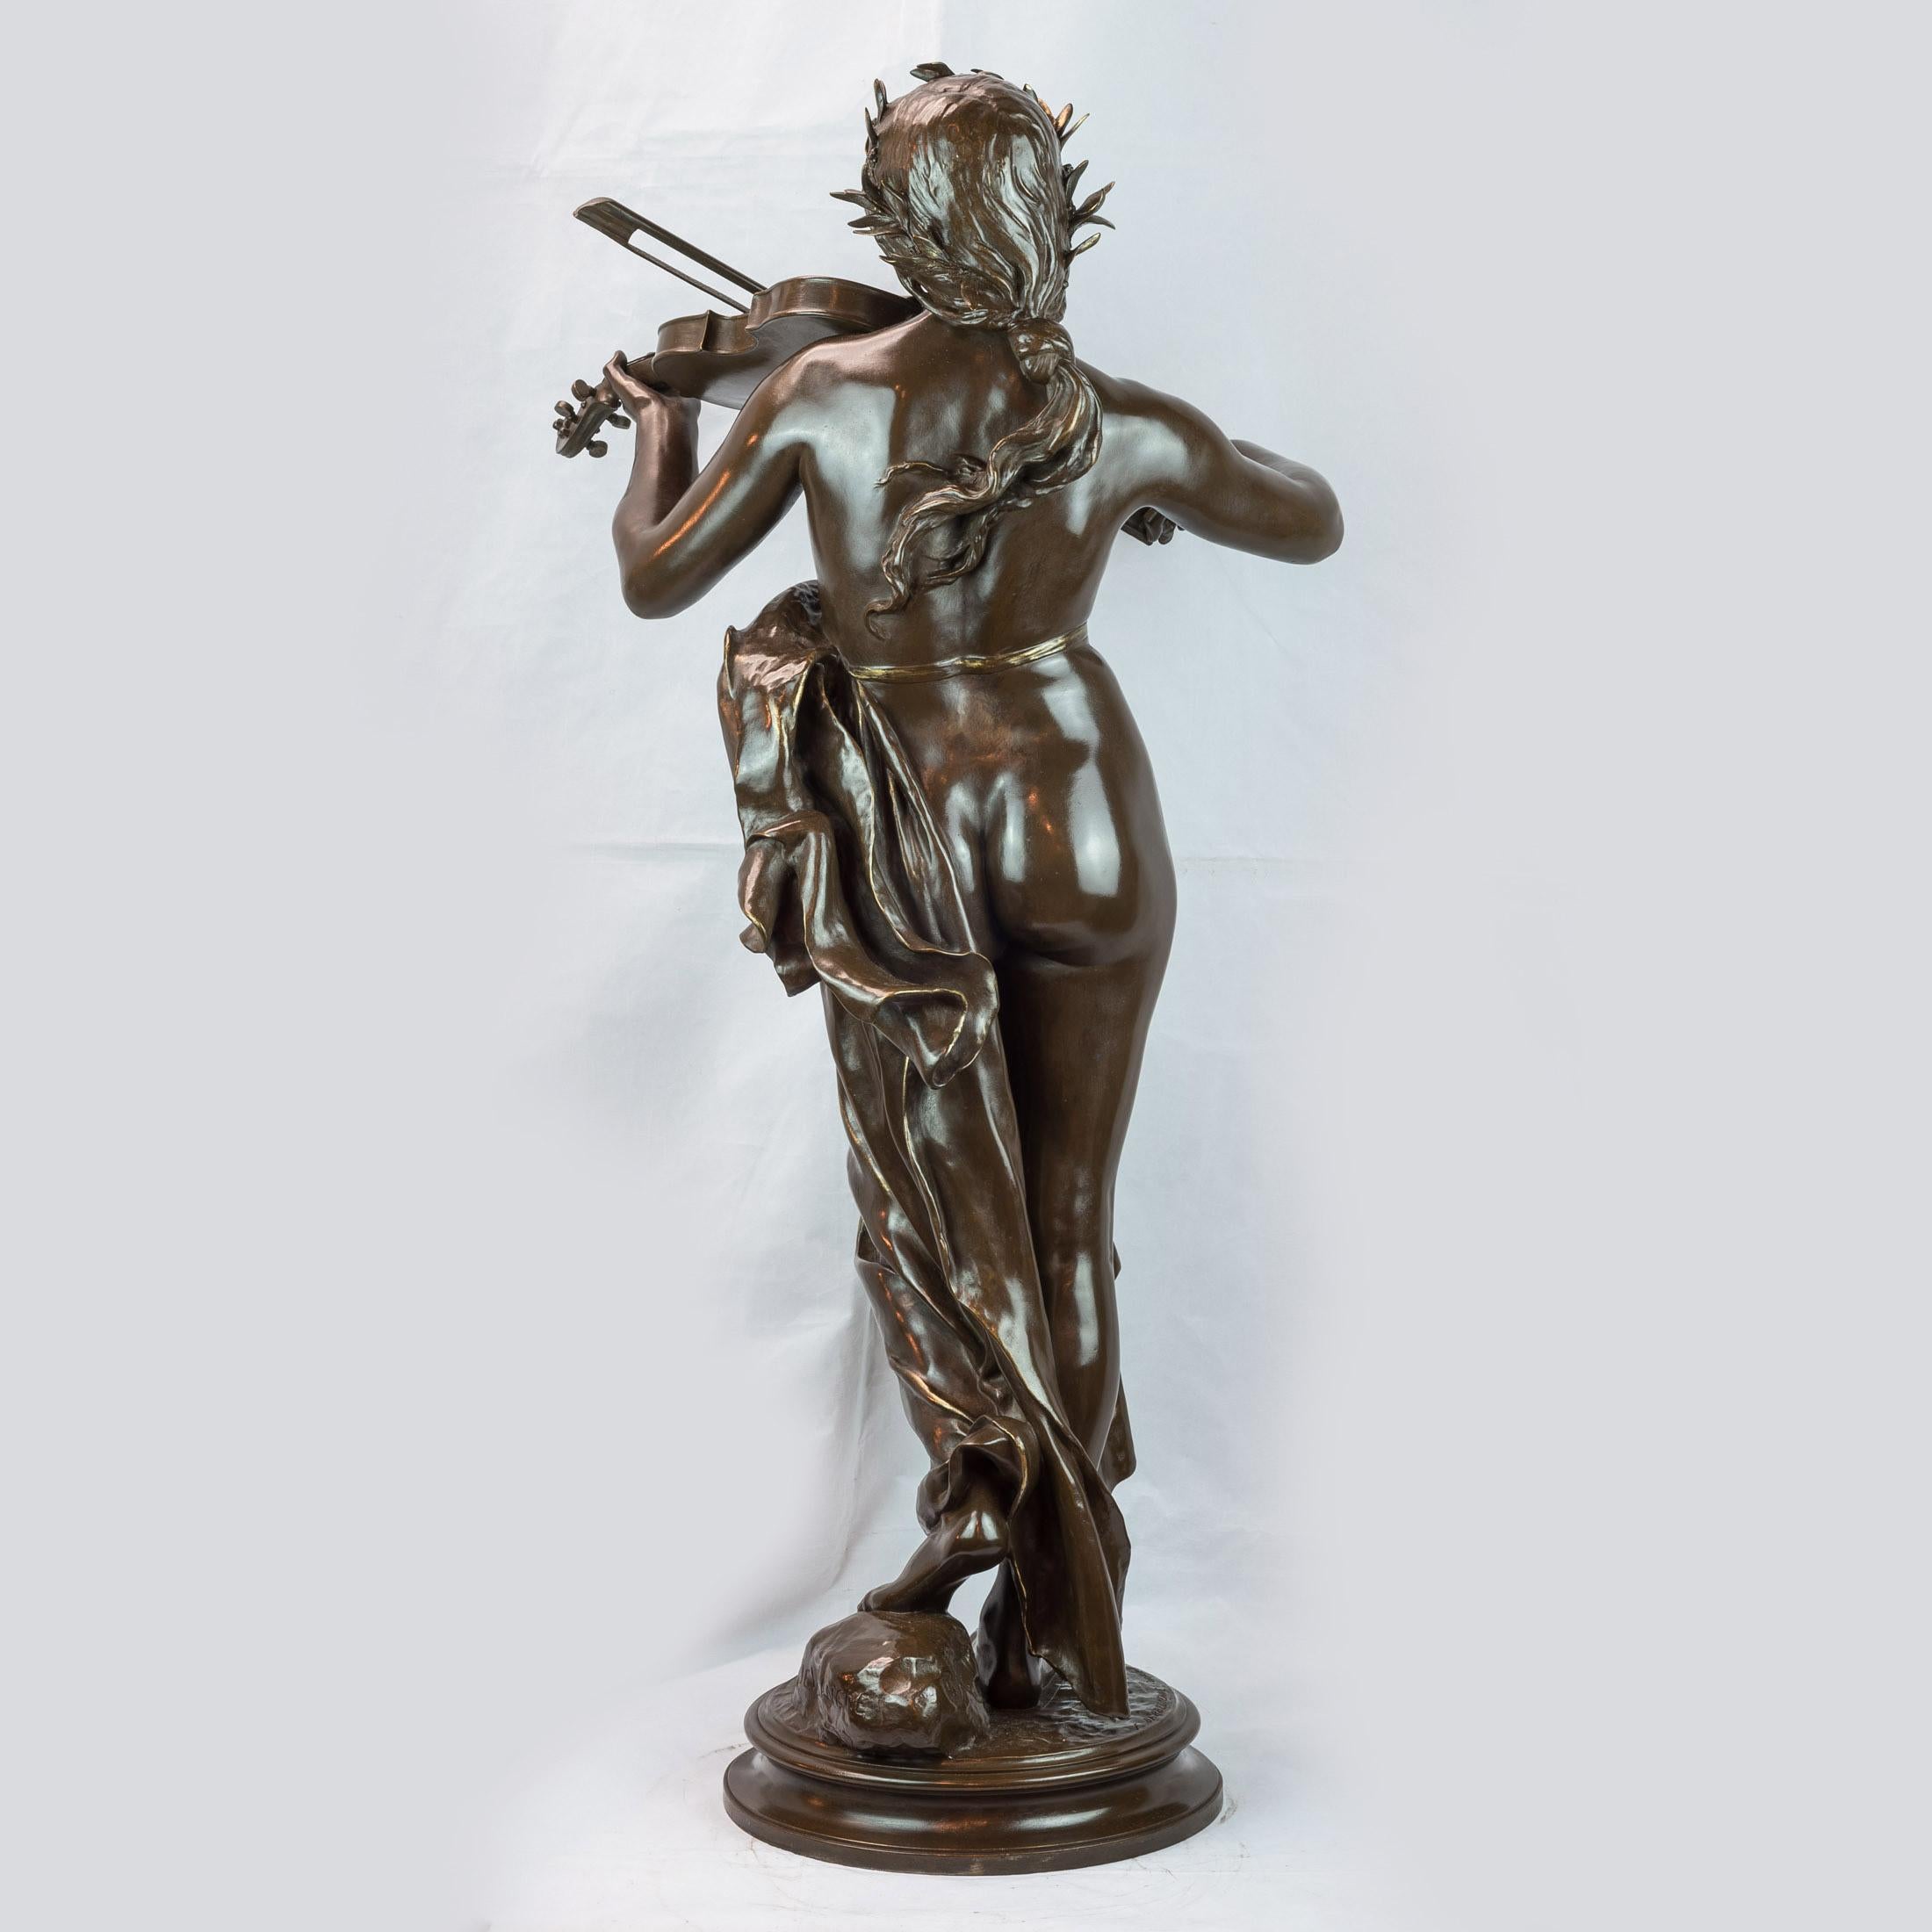 A large patinated bronze sculpture of a woman playing a violin 